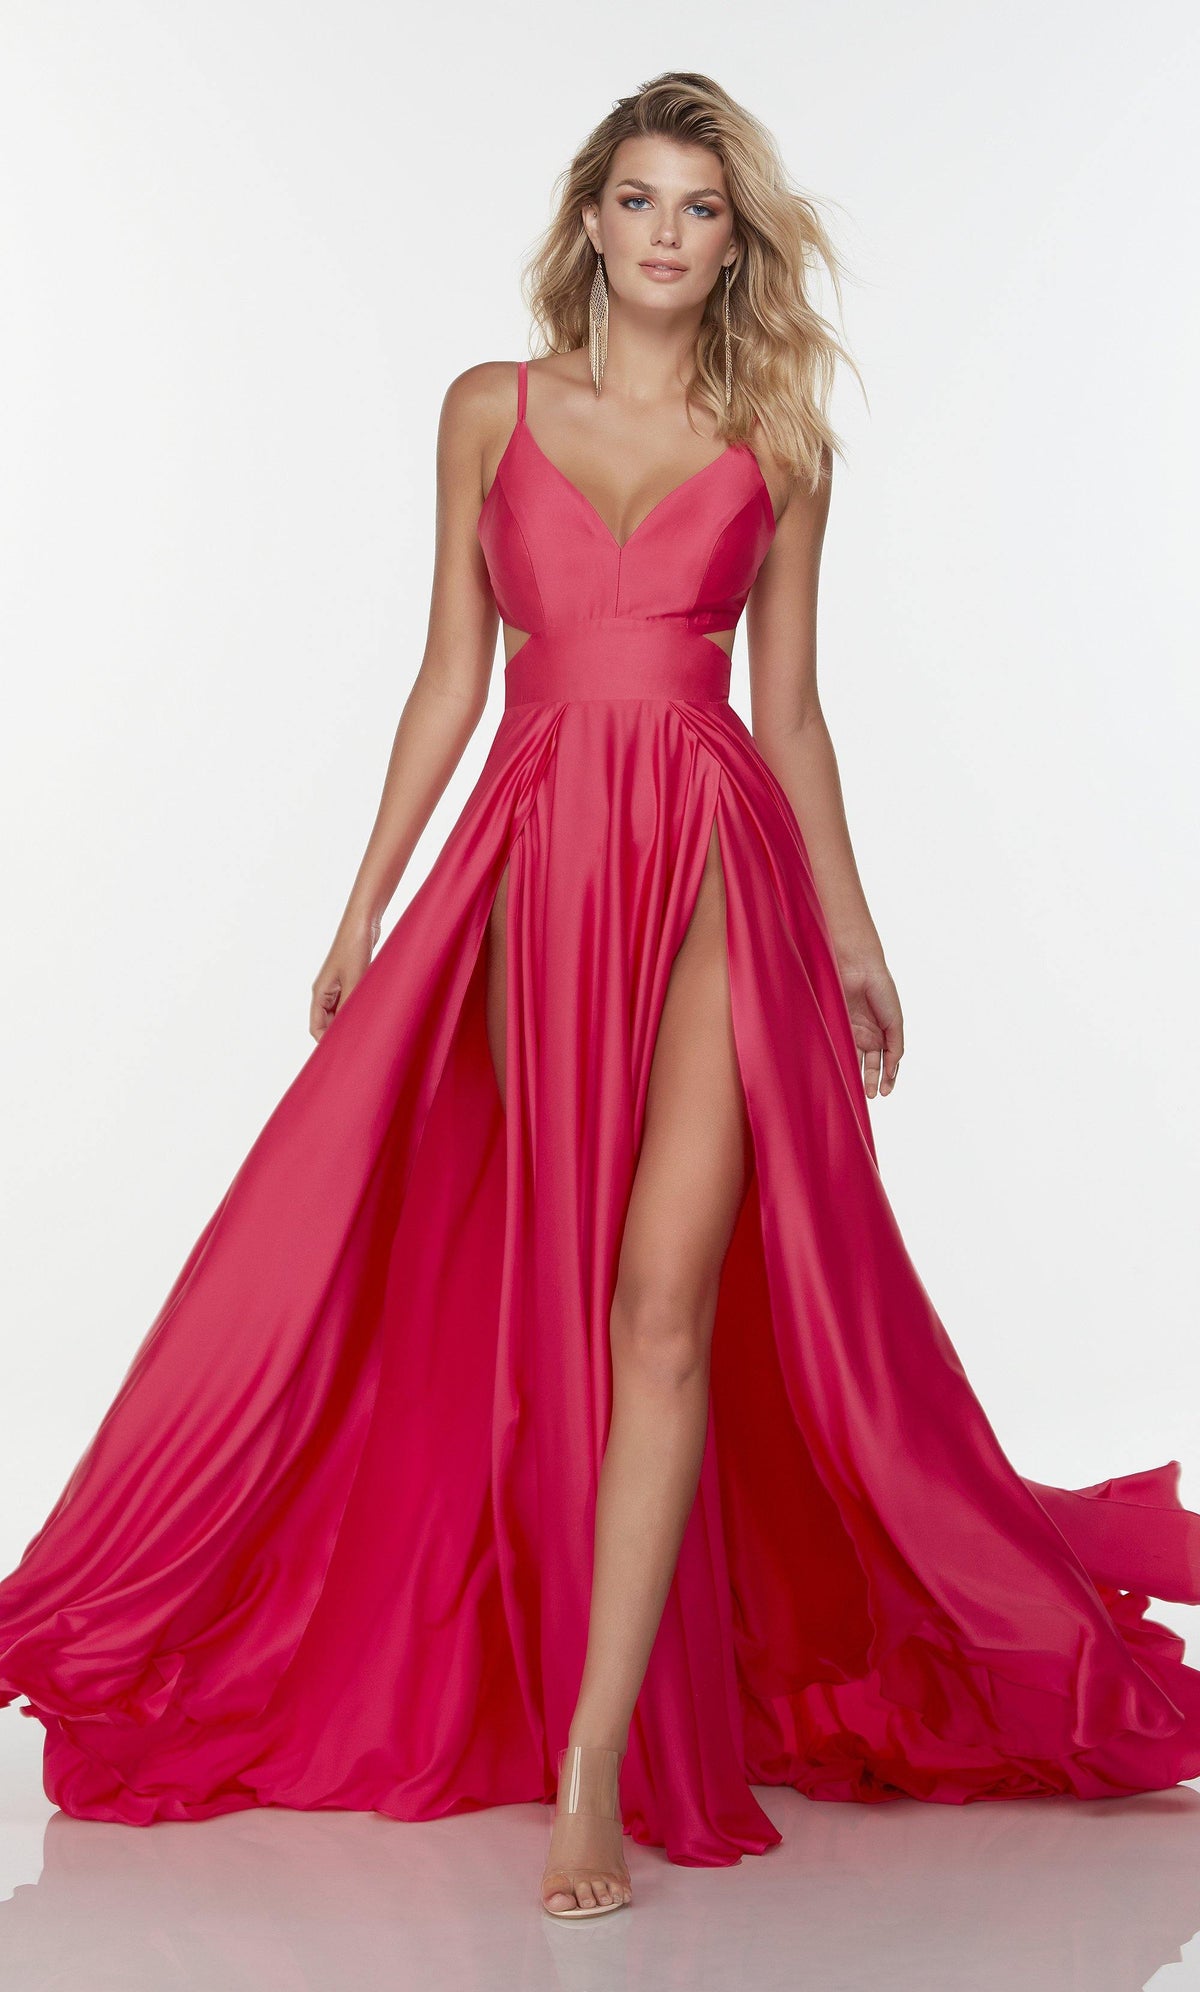 Long hot pink double slit dress with a v neck and side cut outs.